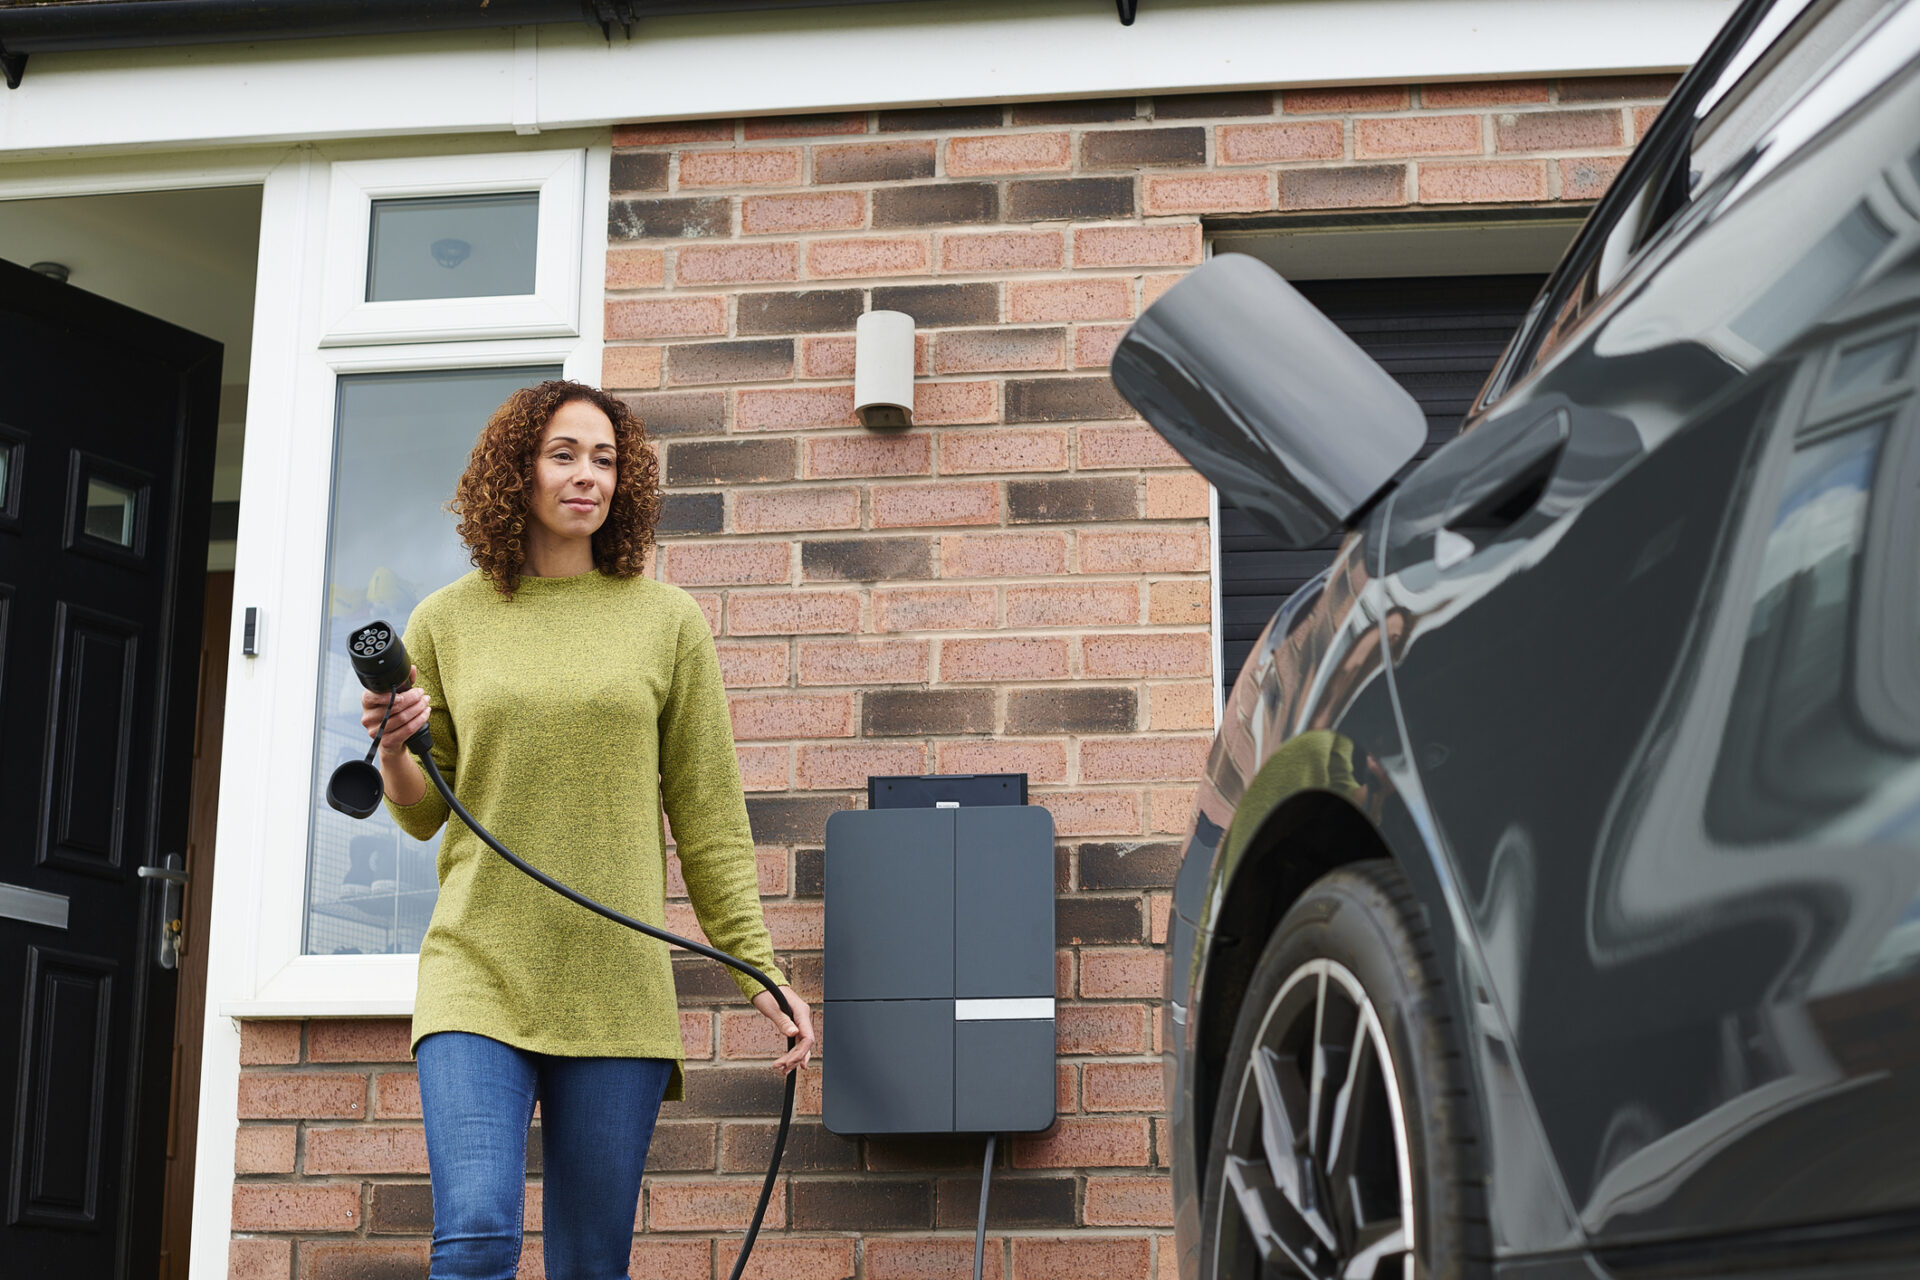 A person stands next to an electric vehicle, holding a charging plug near a home charging station outside a brick house with a white door.